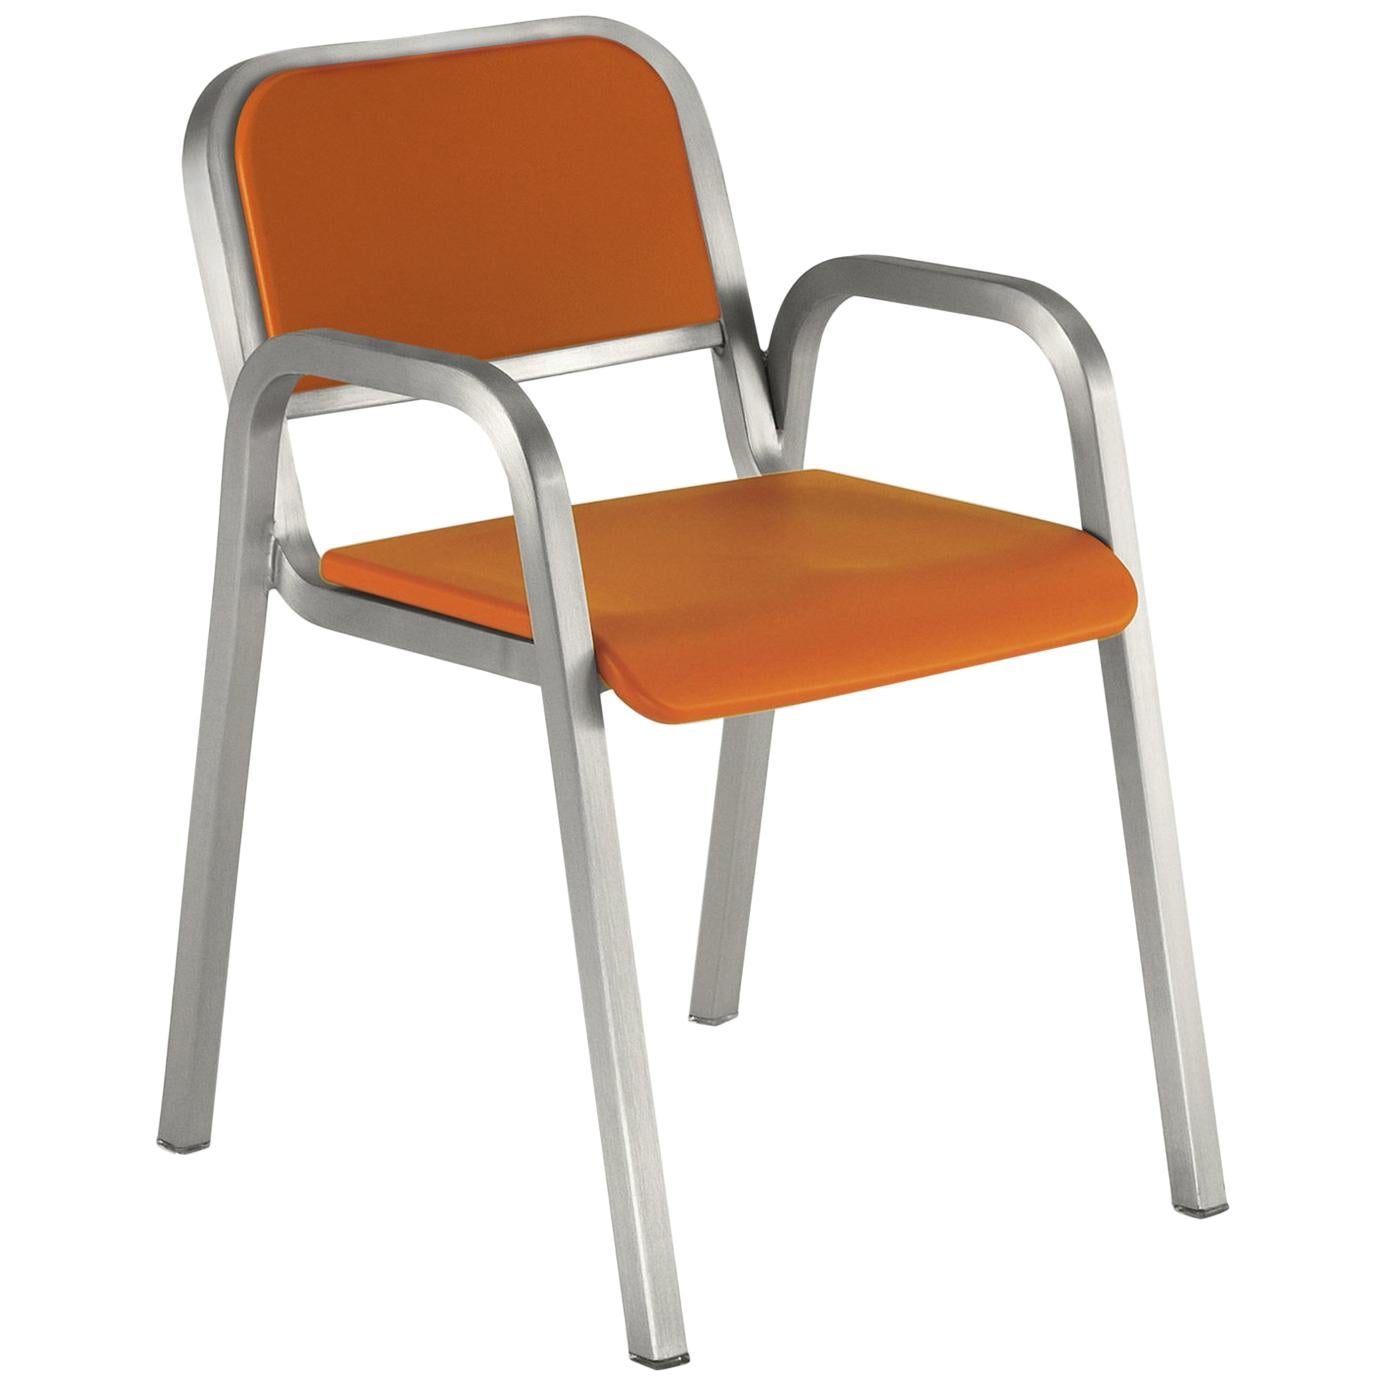 Emeco Nine-0 Armchair in Brushed Aluminum and Orange by Ettore Sottsass